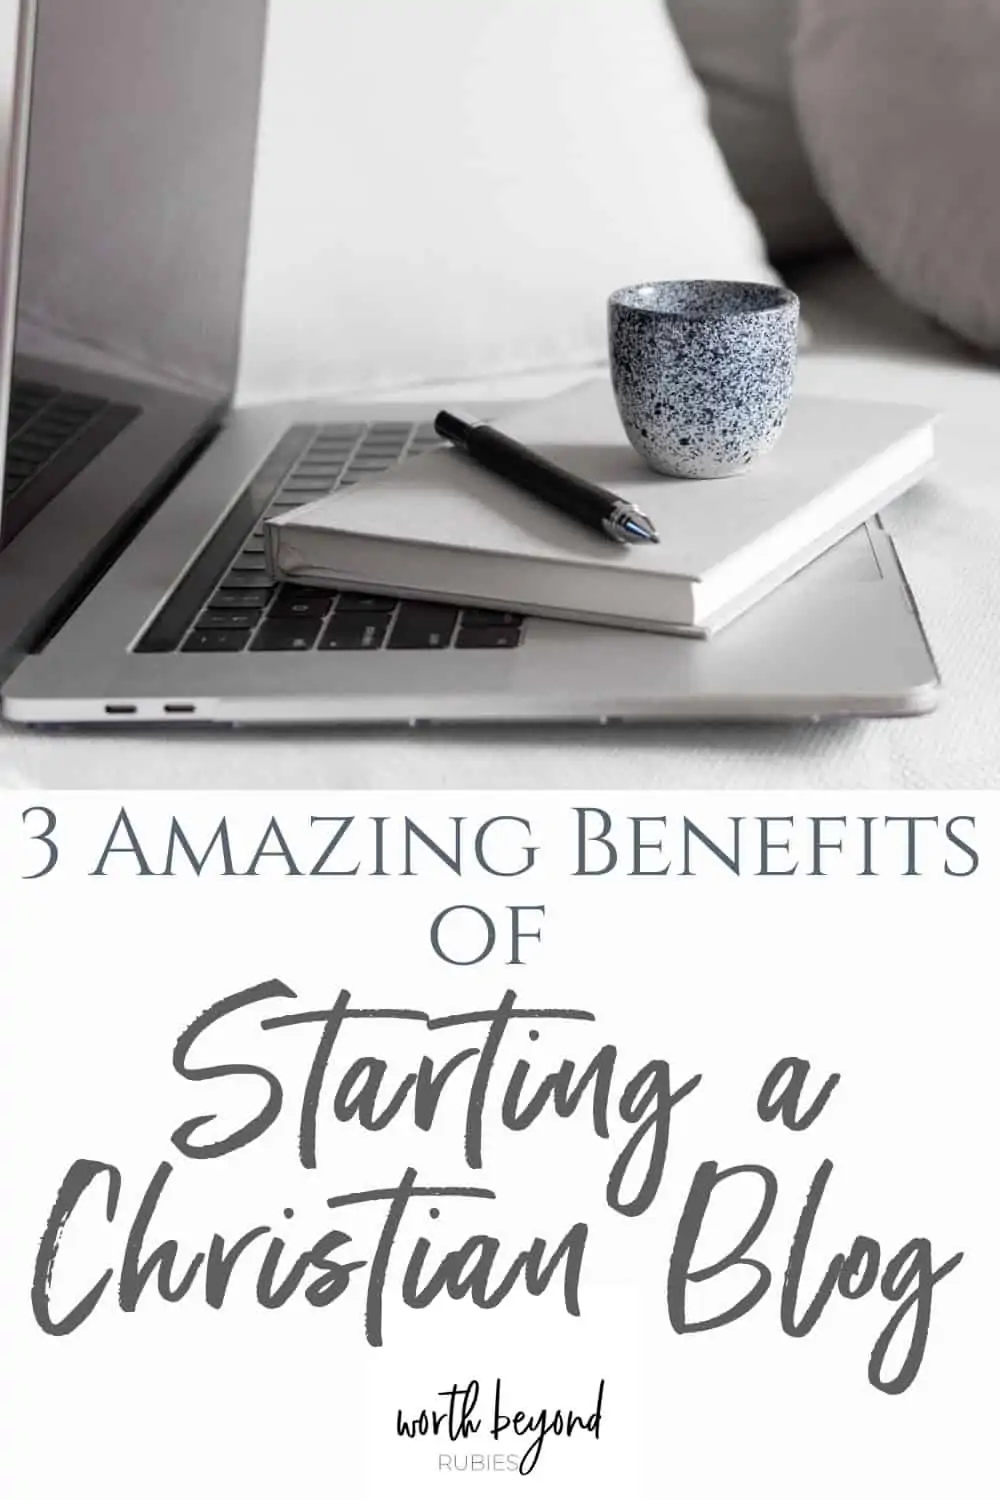 Laptop, book and coffee cup on couch - Text that says 3 Amazing Benefits of Starting a Christian Blog